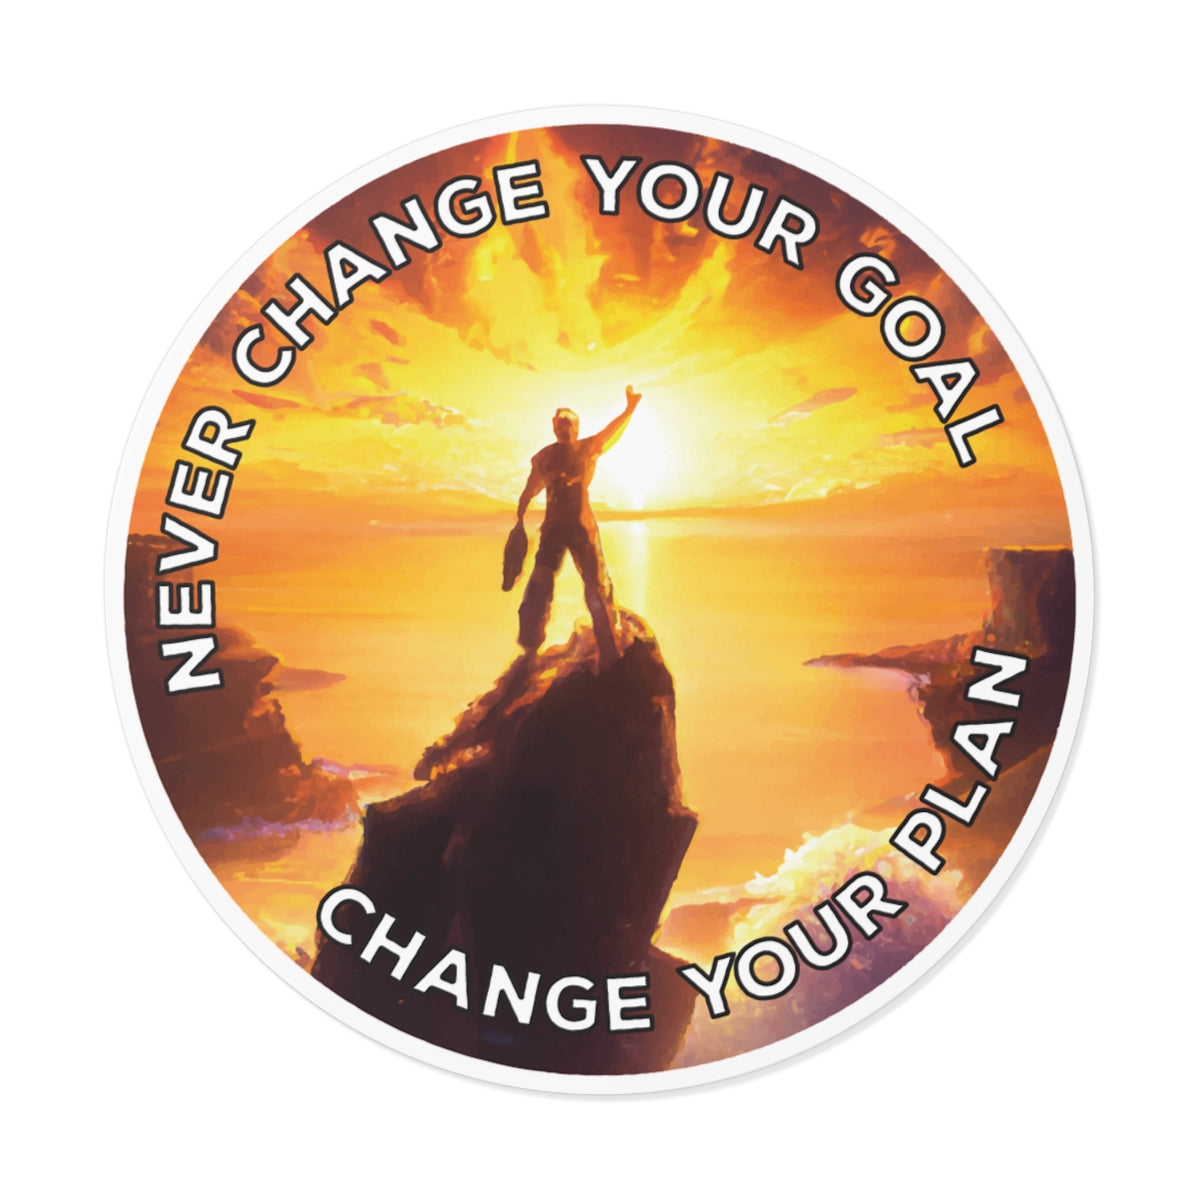 Never change your goal - Round Vinyl Sticker #size_3x3-inches